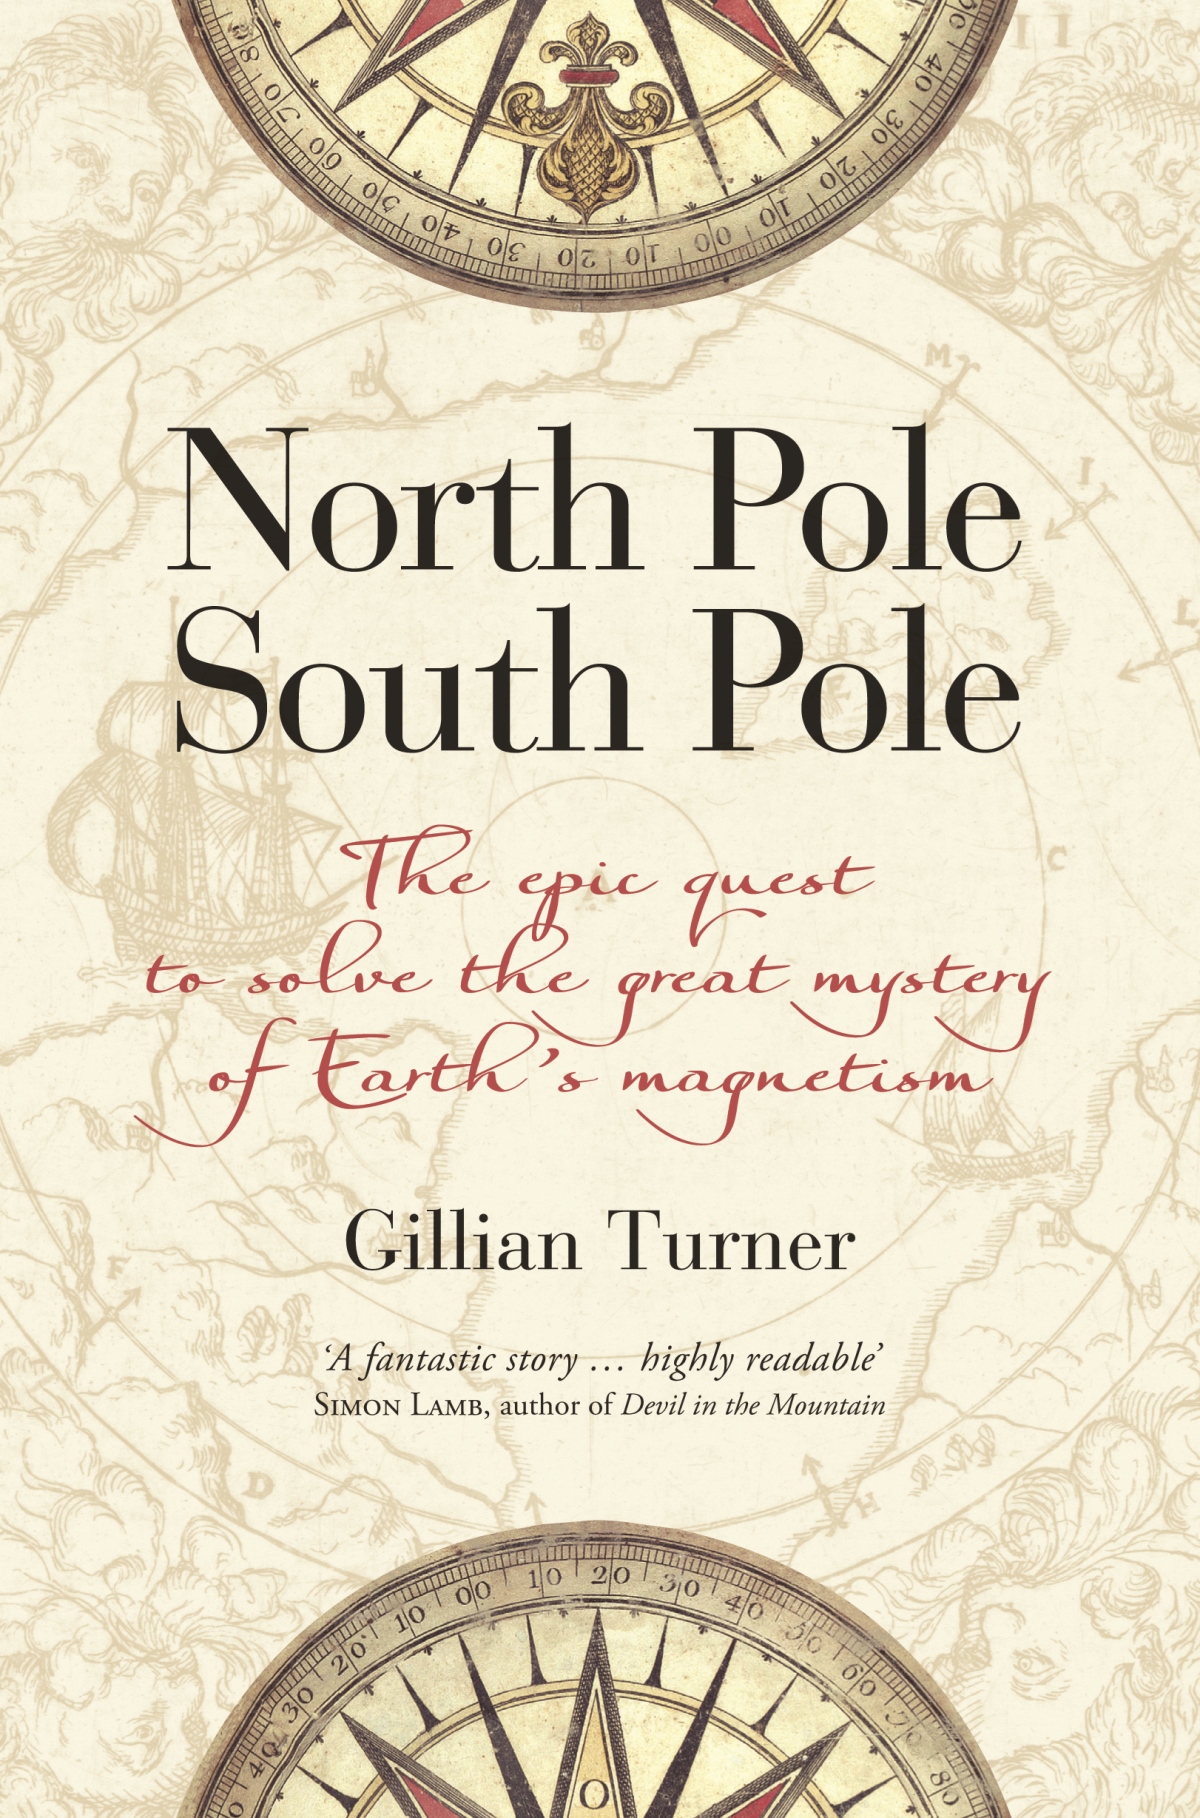 North Pole, South Pole: The epic quest to solve the great mystery of